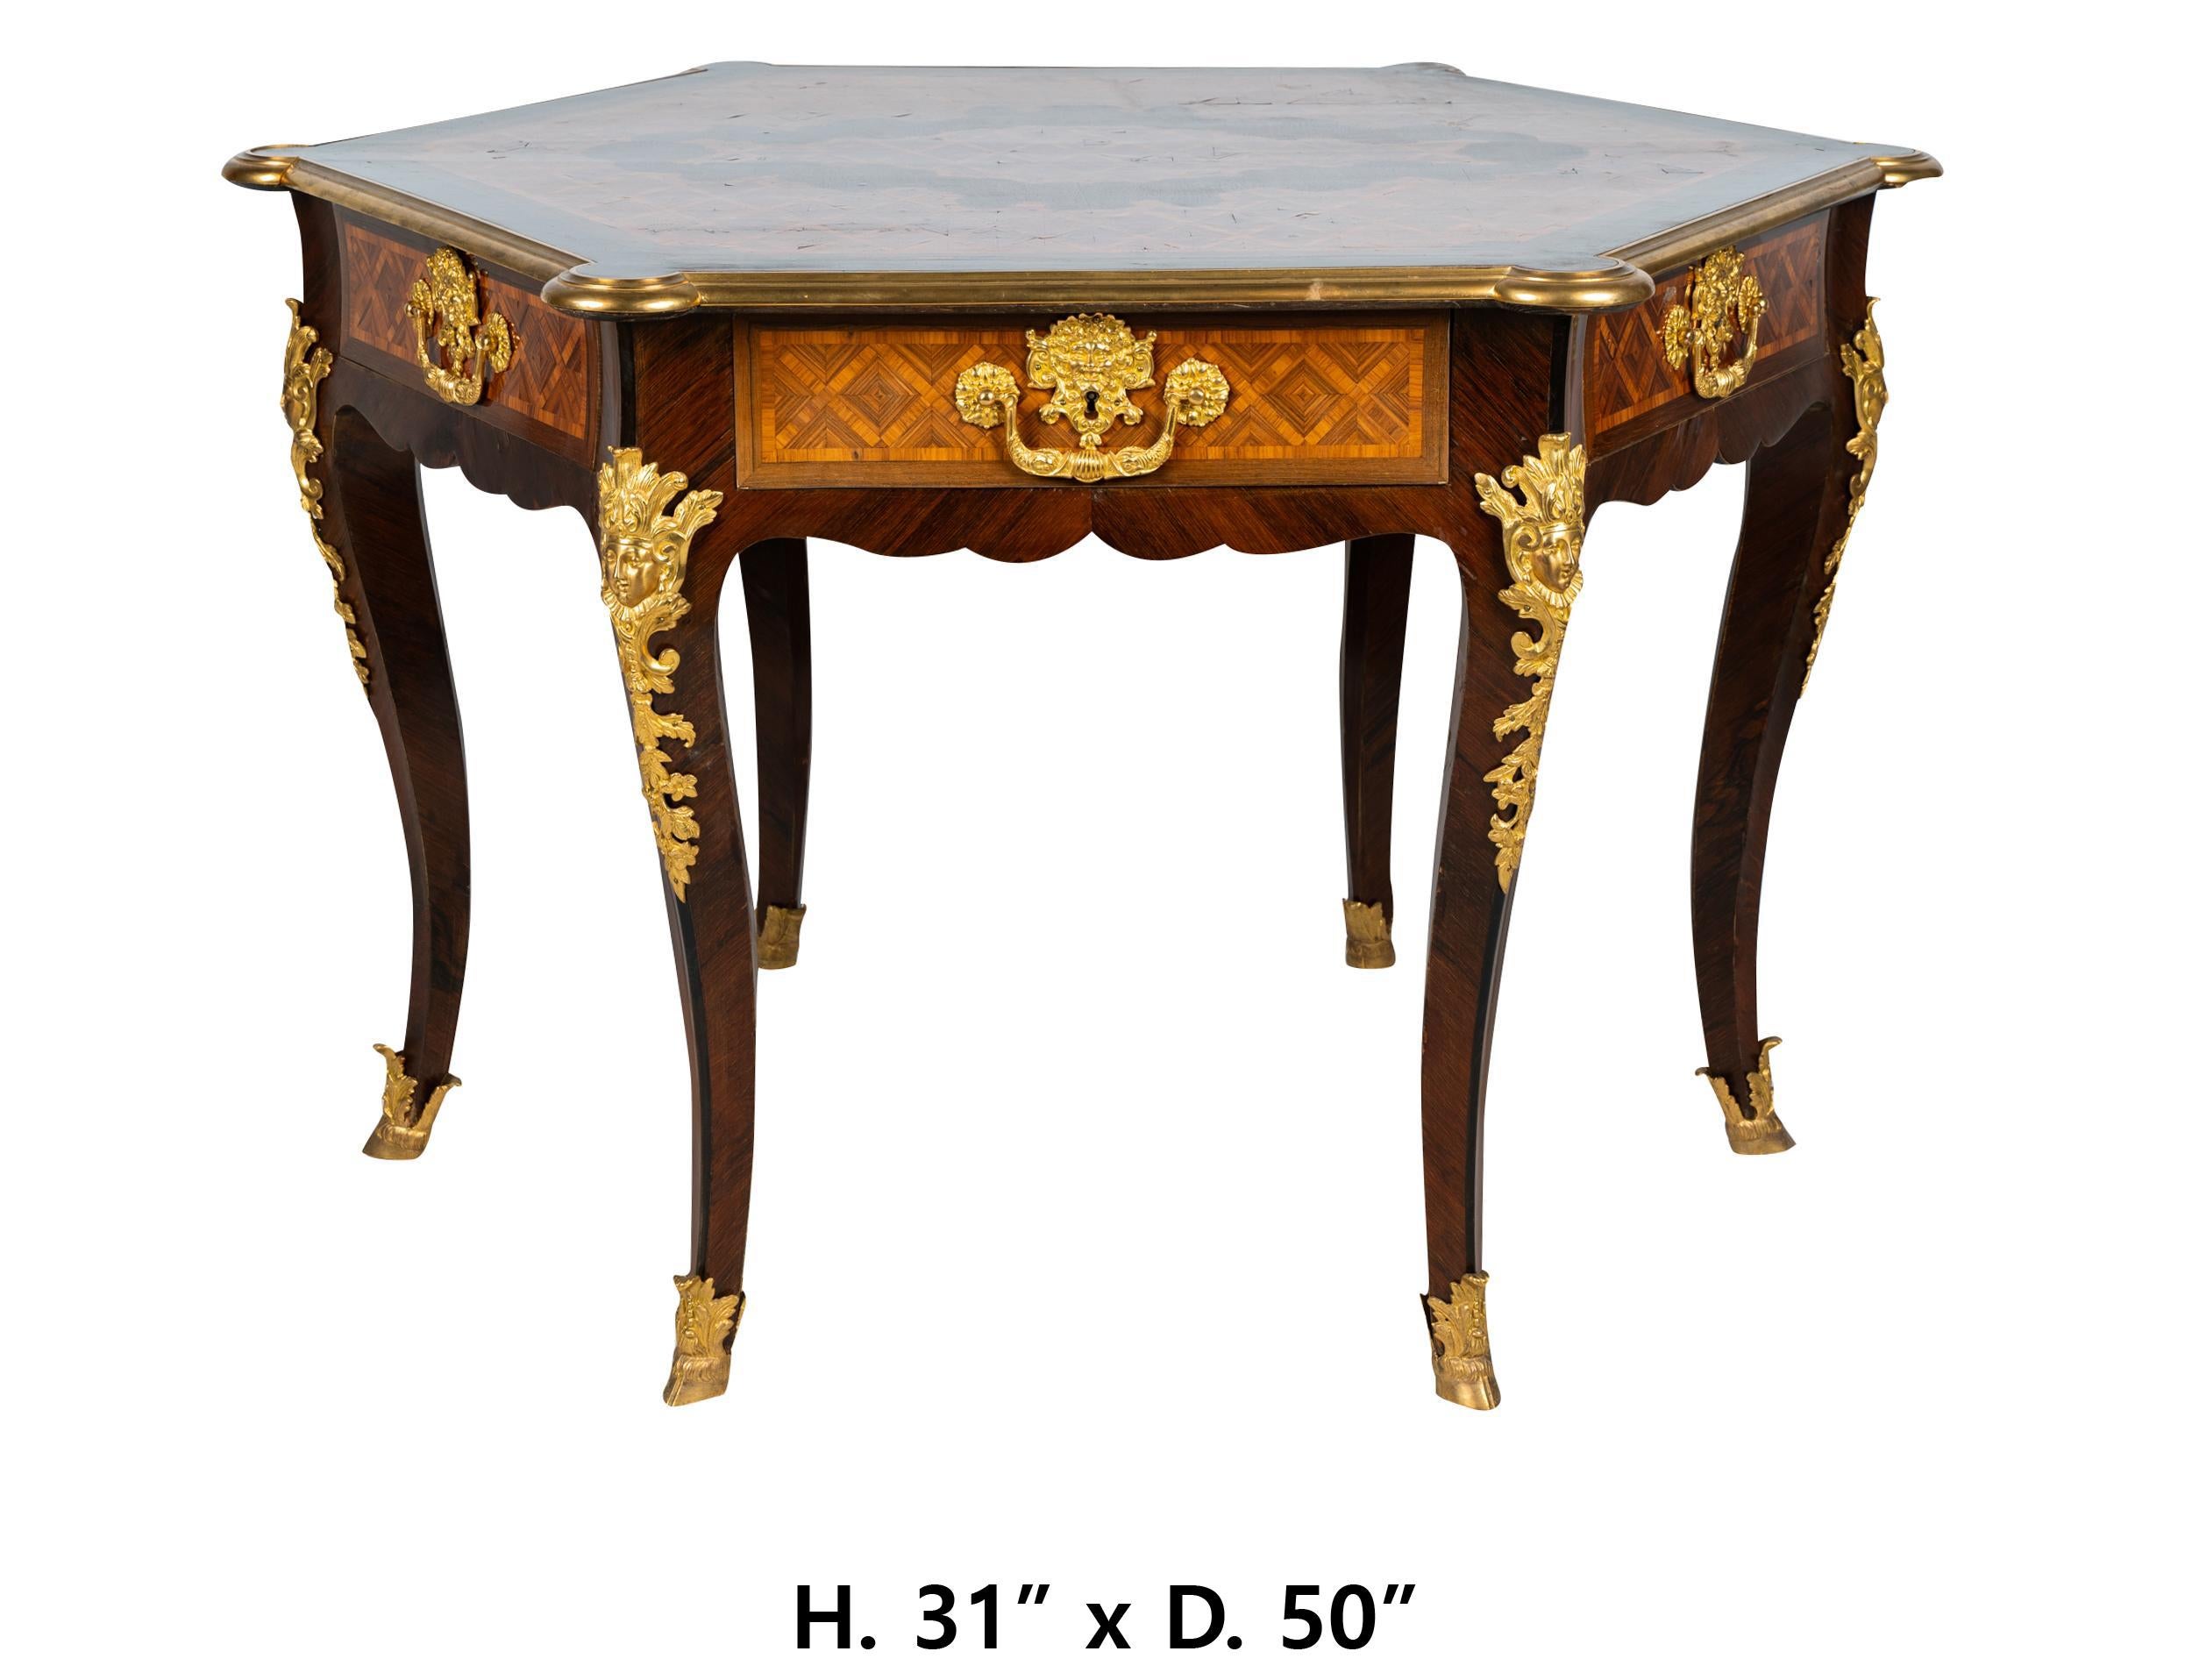 Outstanding French Louis XV style gilt bronze mounted parquetry mounted hexagonal top center table, 1st half of the 20th century.
Meticulous attention has been given to every detail 
the hexagonal inlaid top over six drawers raised on six